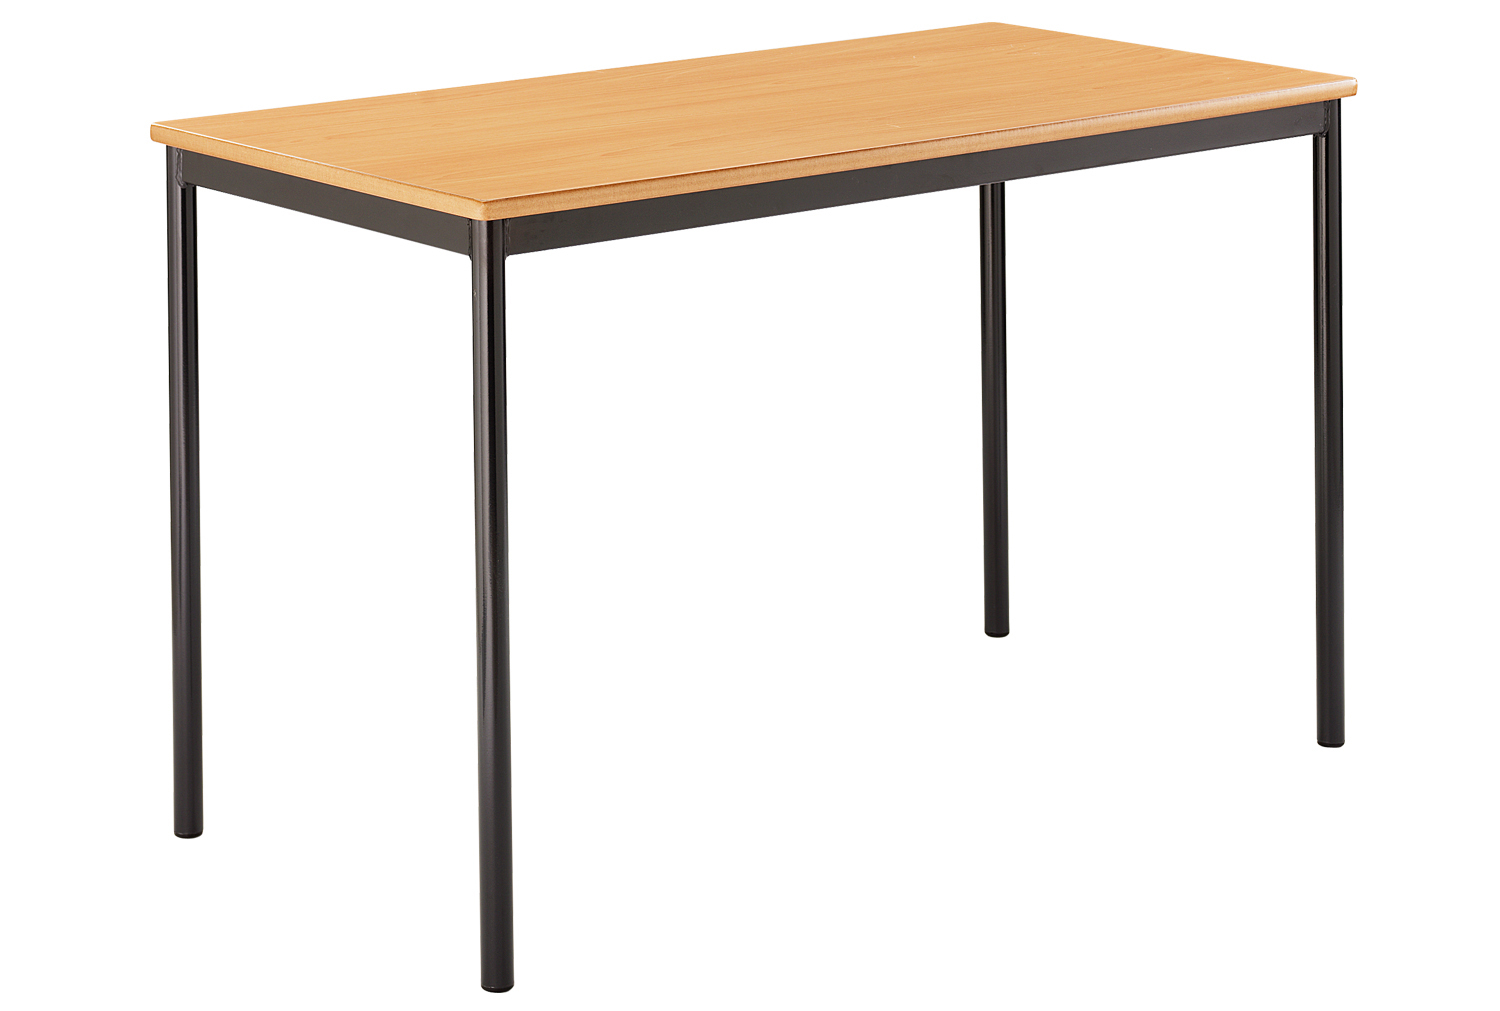 Qty 4 - Rectangular Fully Welded Classroom Tables 6-8 Years, 120wx60dx59h (cm), Light Grey Frame, Grey Top, ABS Grey Edge